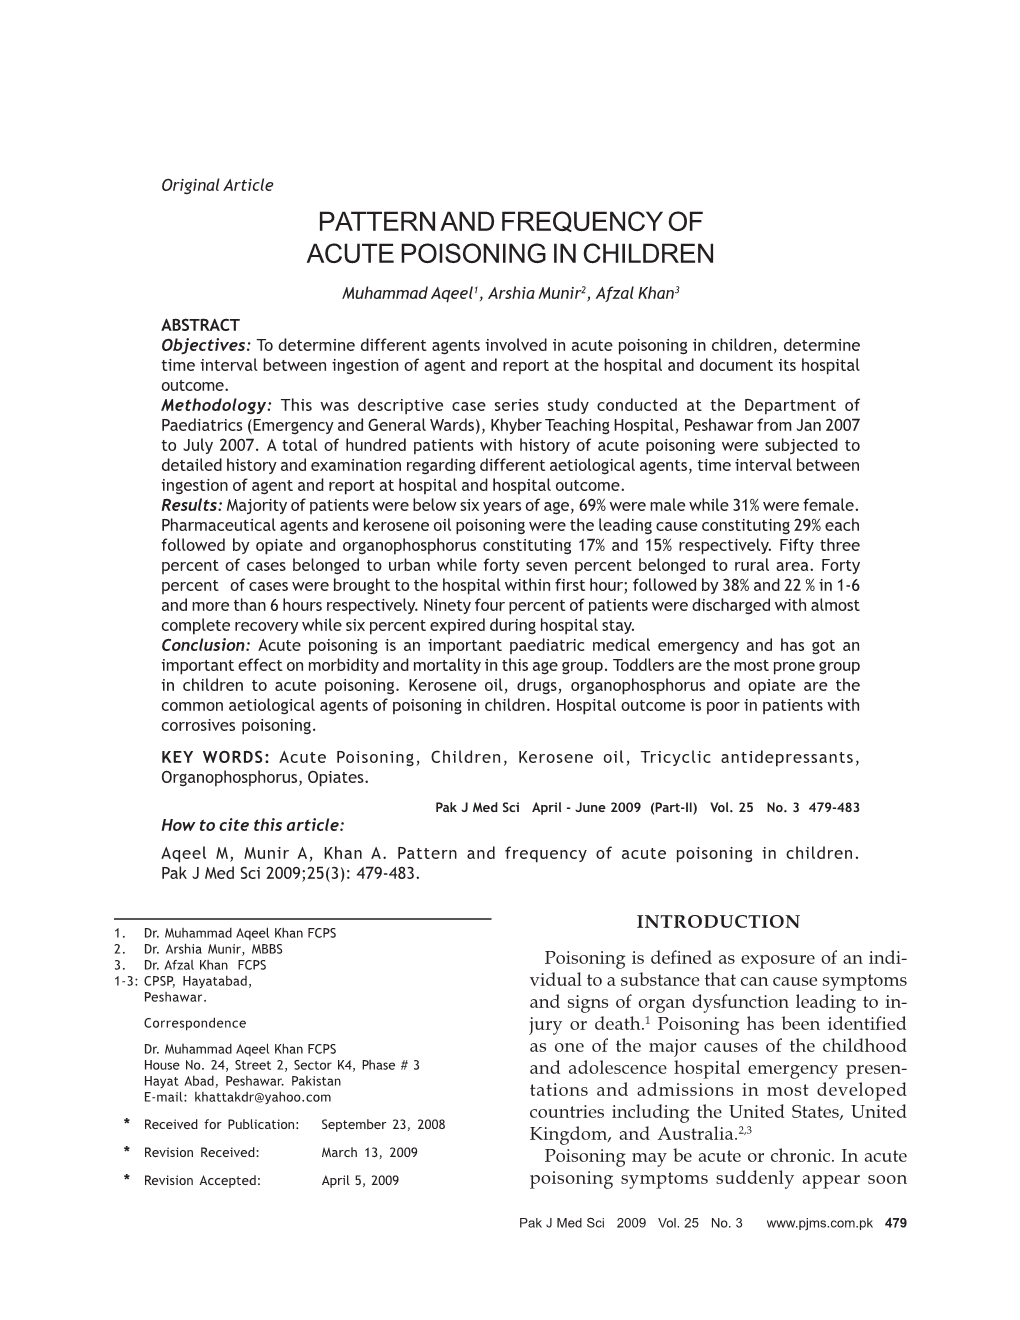 Pattern and Frequency of Acute Poisoning in Children